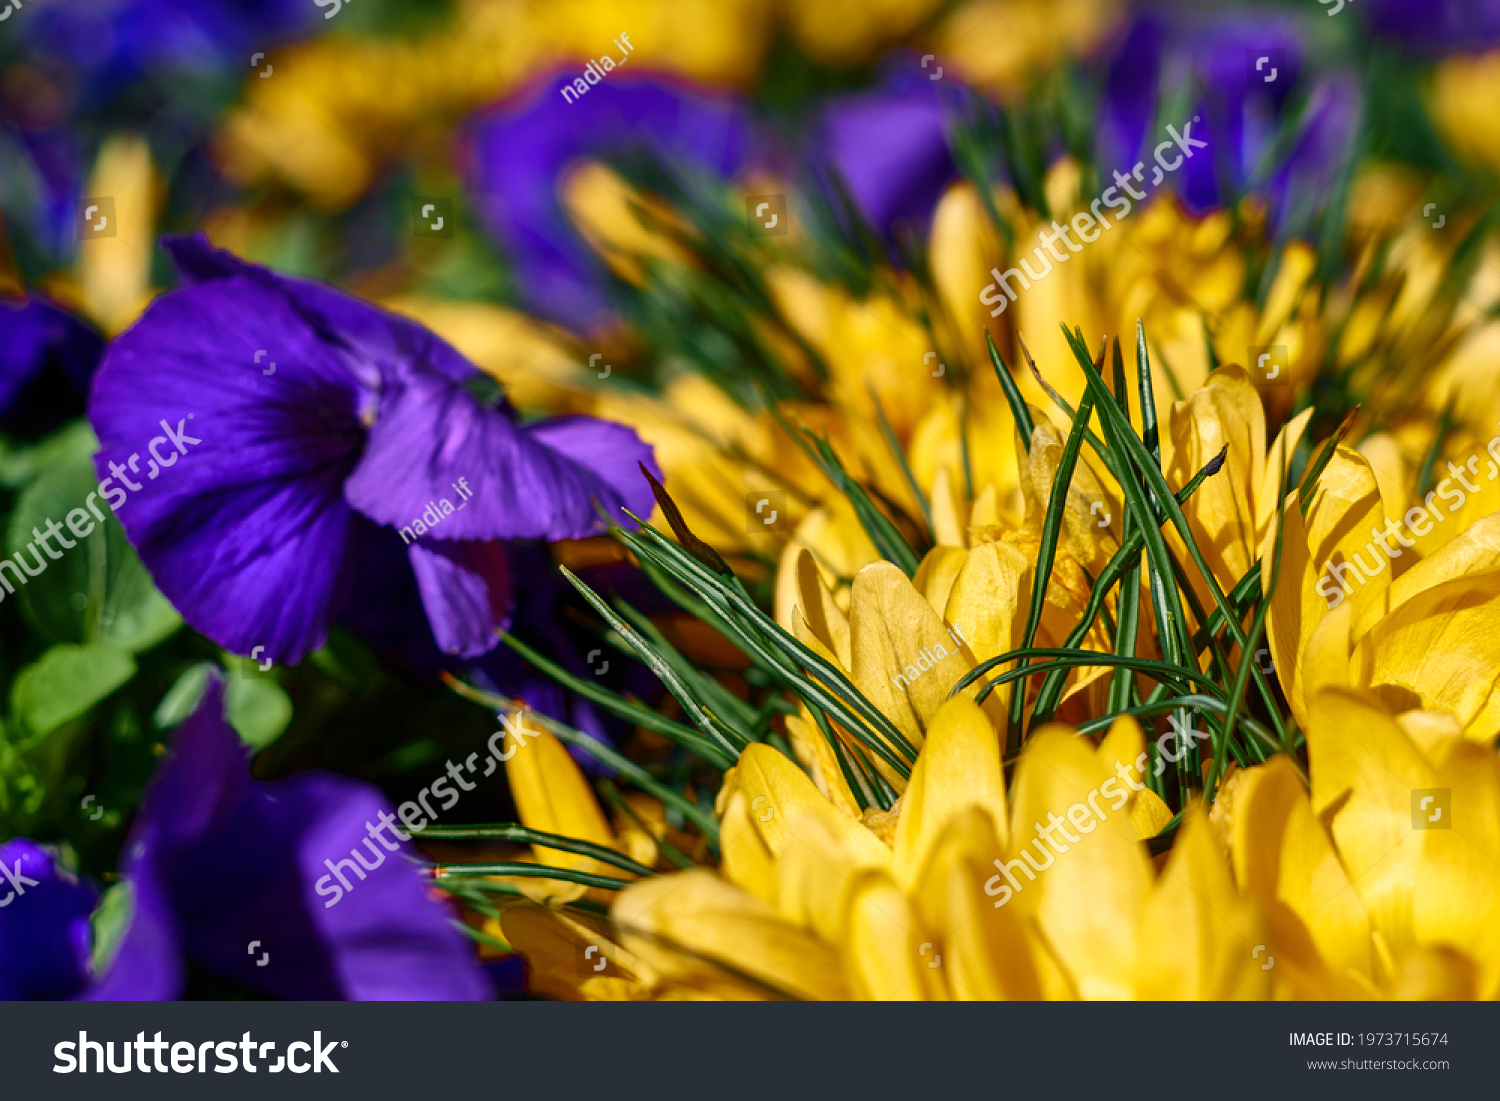 beautiful yellow crocus and purple pansies in blooming. High quality photo #1973715674